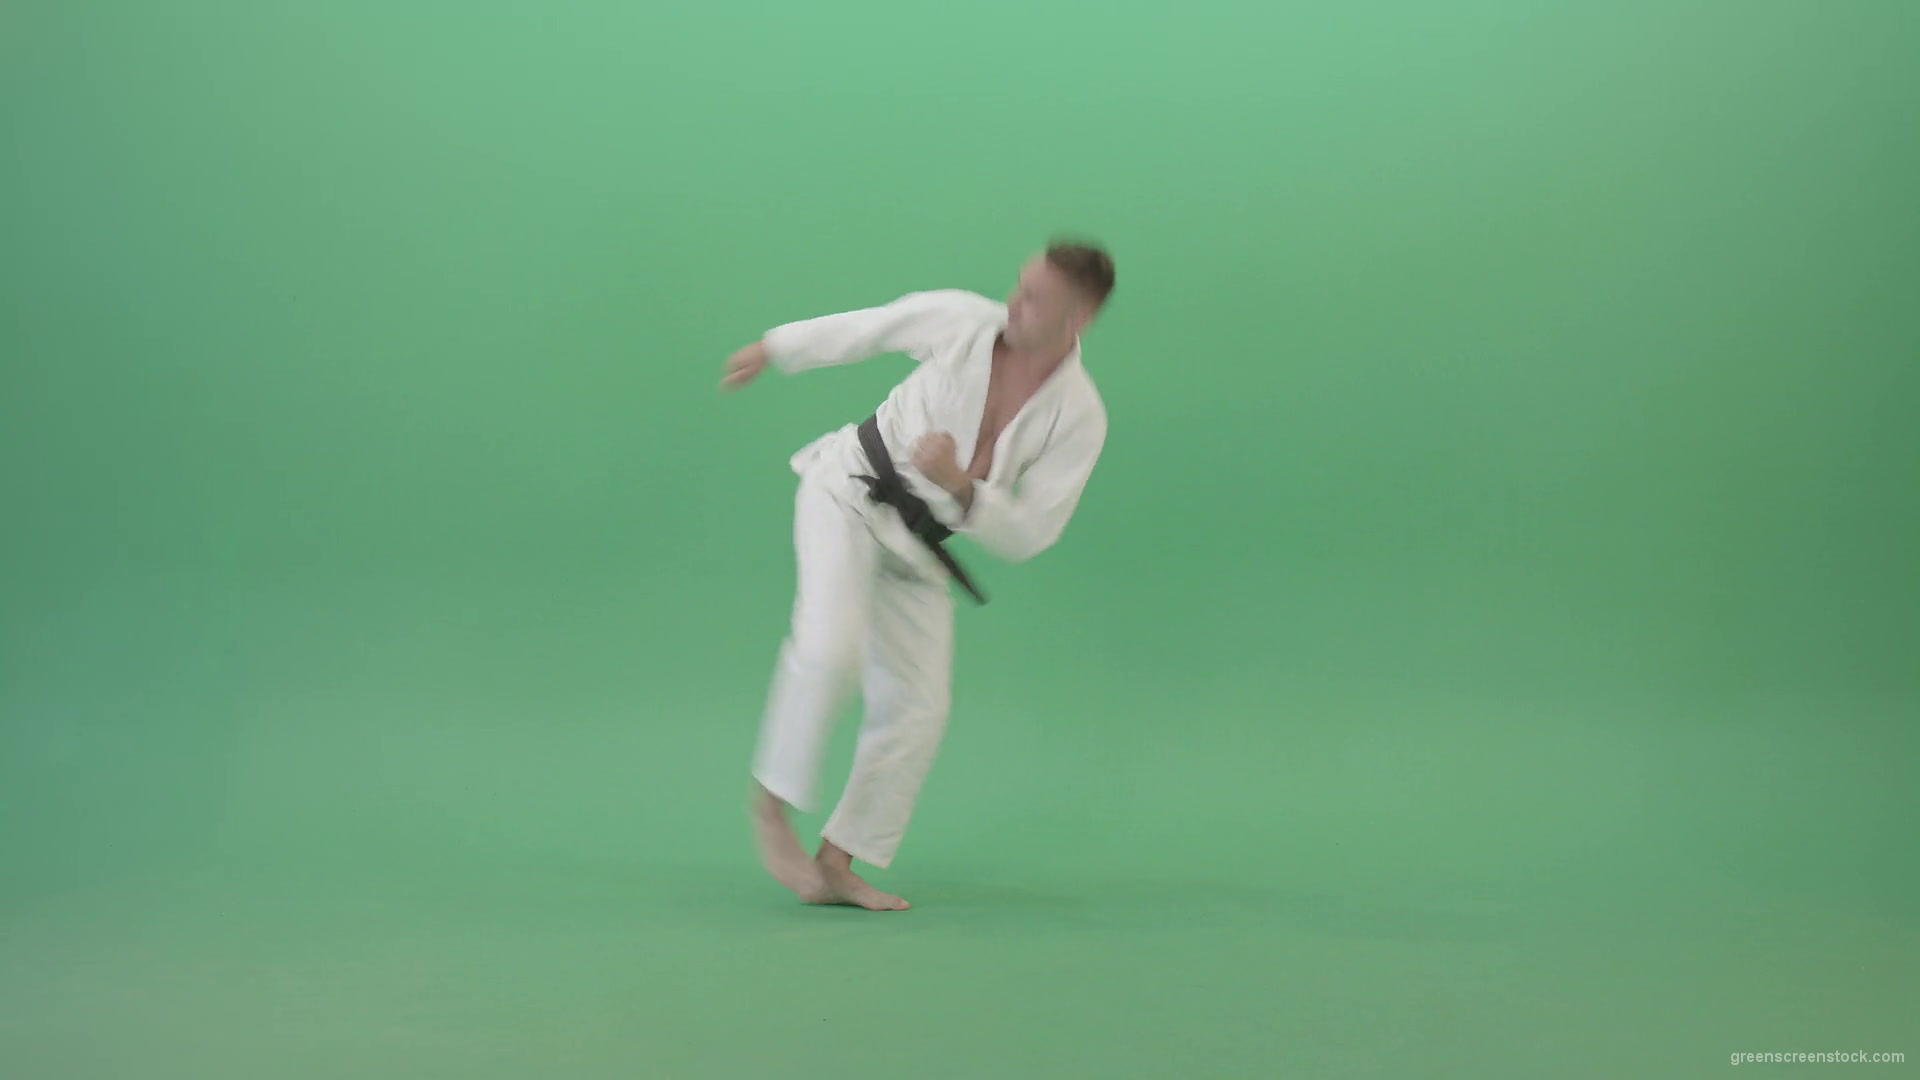 Super-Fighting-Combo-by-Jujutsu-man-in-side-view-isolated-on-green-screen-4K-Video-Footage-1920_007 Green Screen Stock